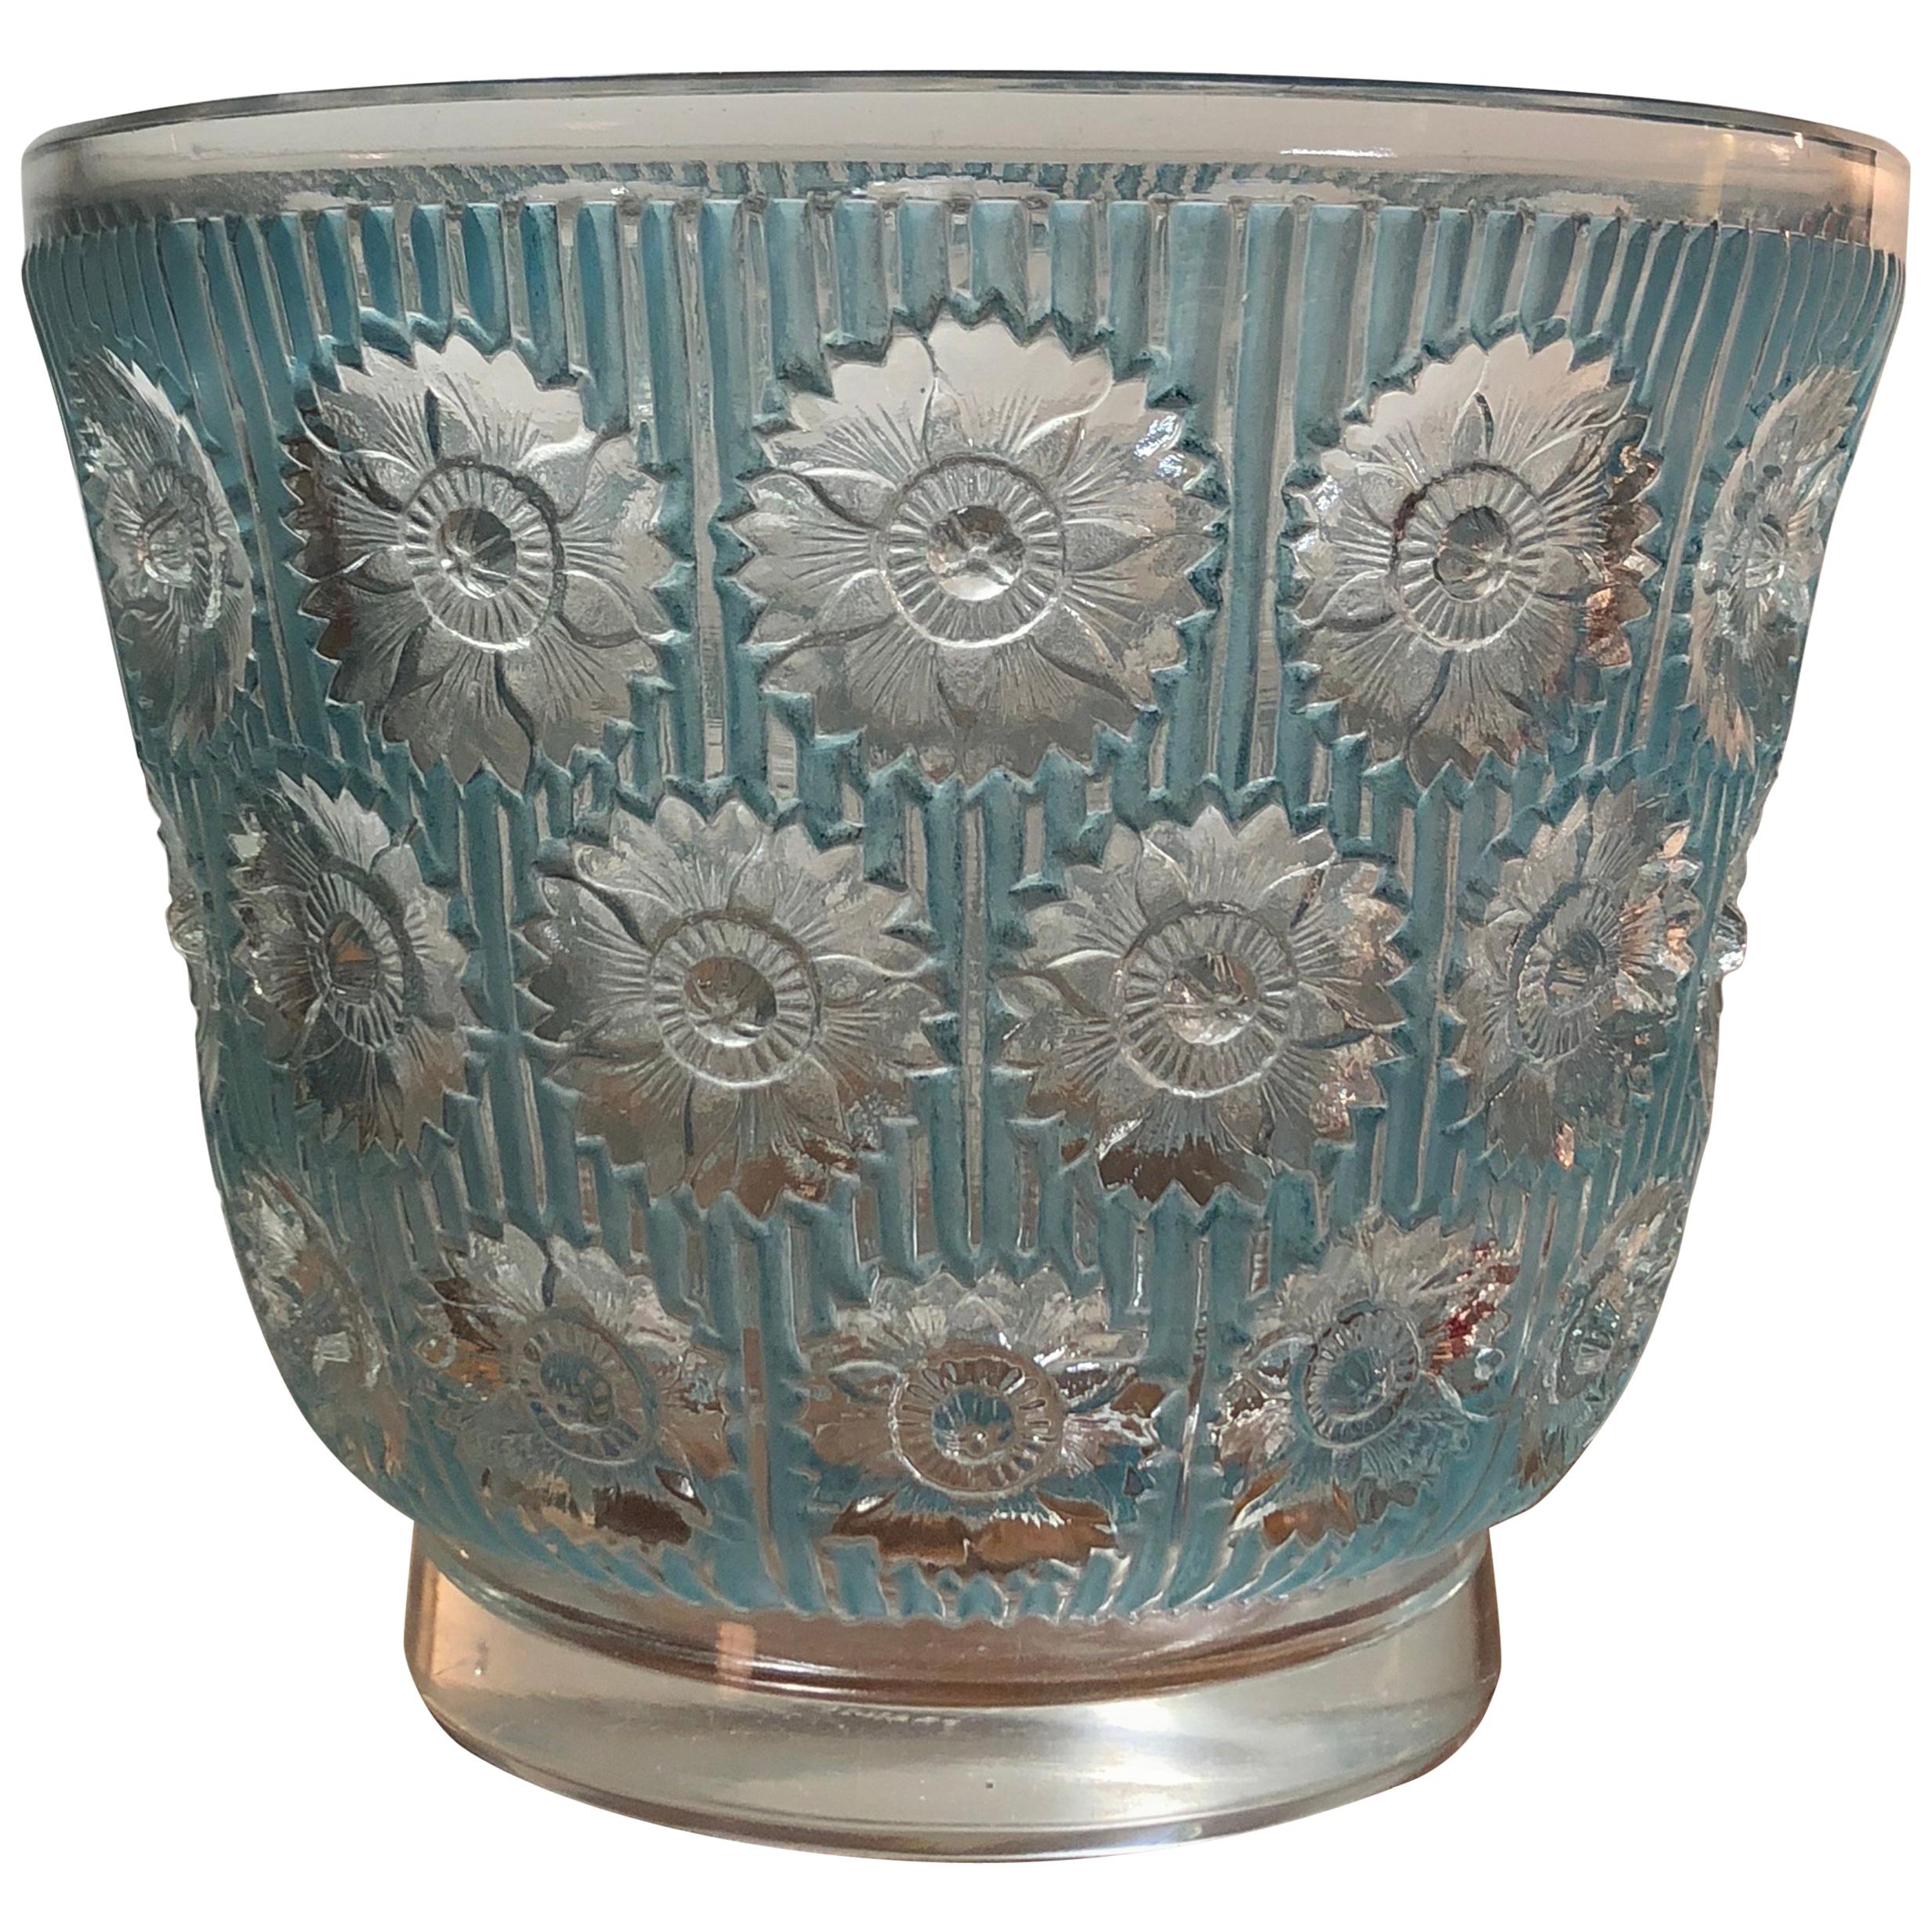 1937 René Lalique Edelweiss Vase in Frosted and Blue Stained Glass, Flowers